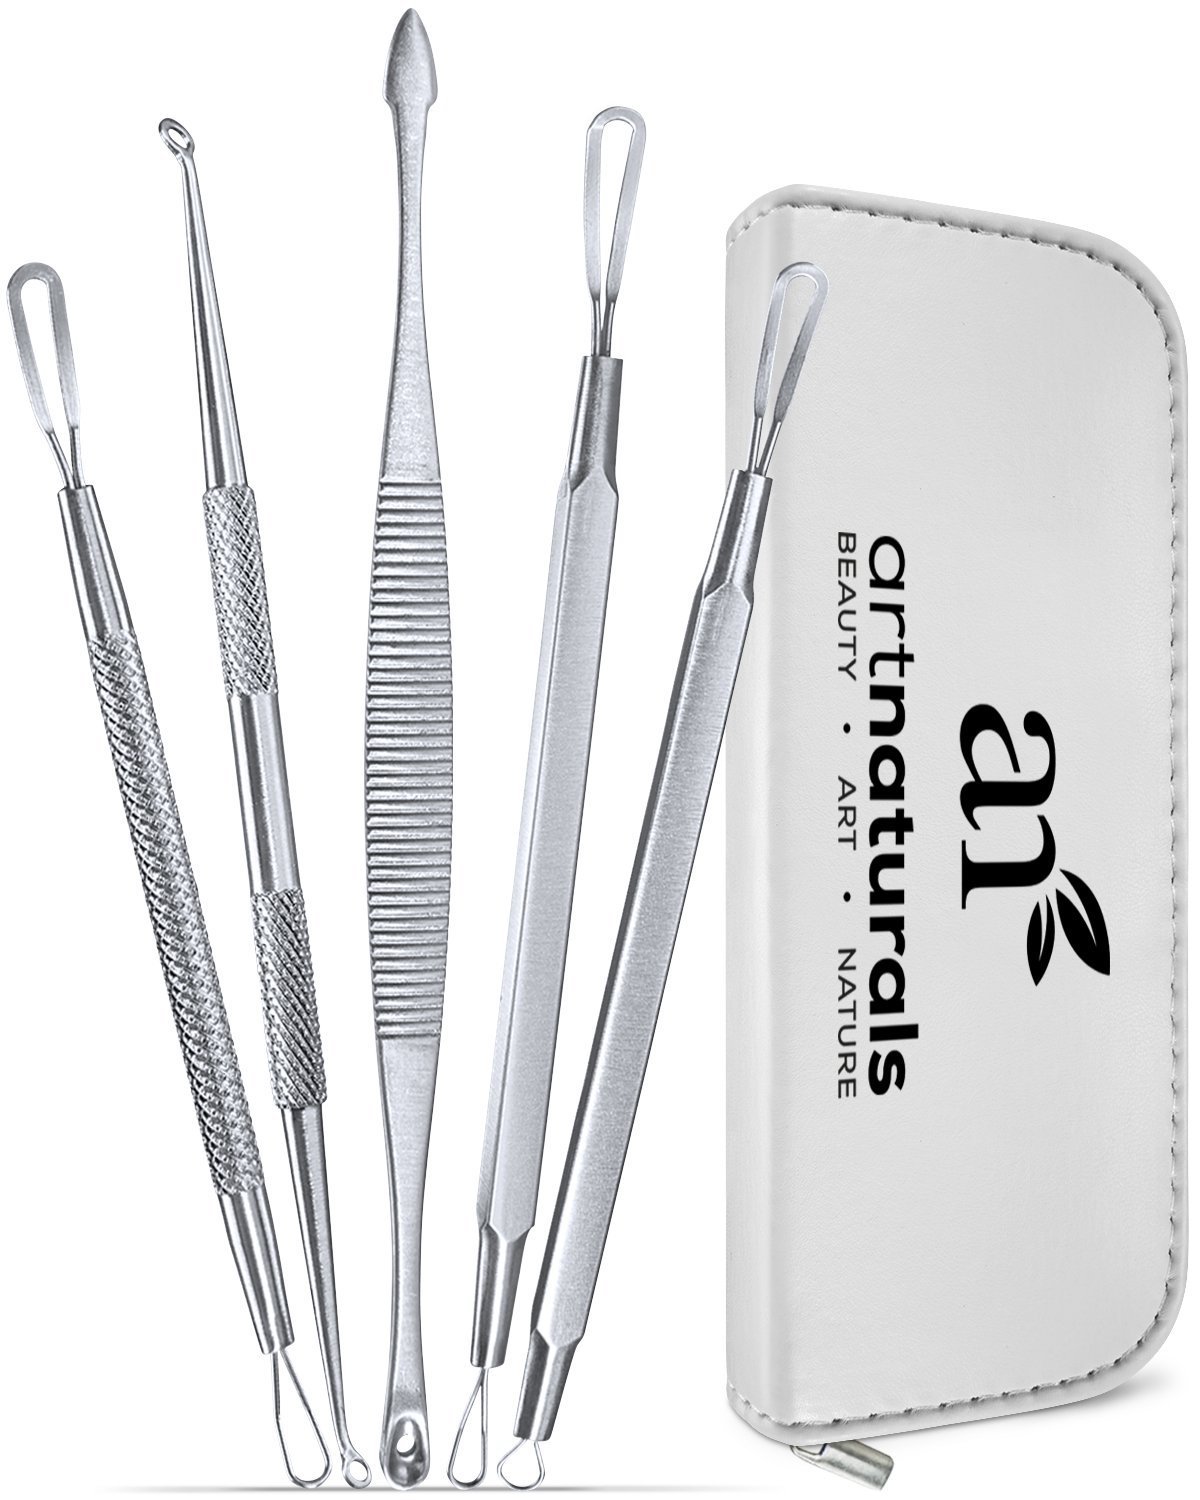 Art Naturals Blackhead Removal Set homepage image art naturals,blackhead removal,blackheads,health and beauty